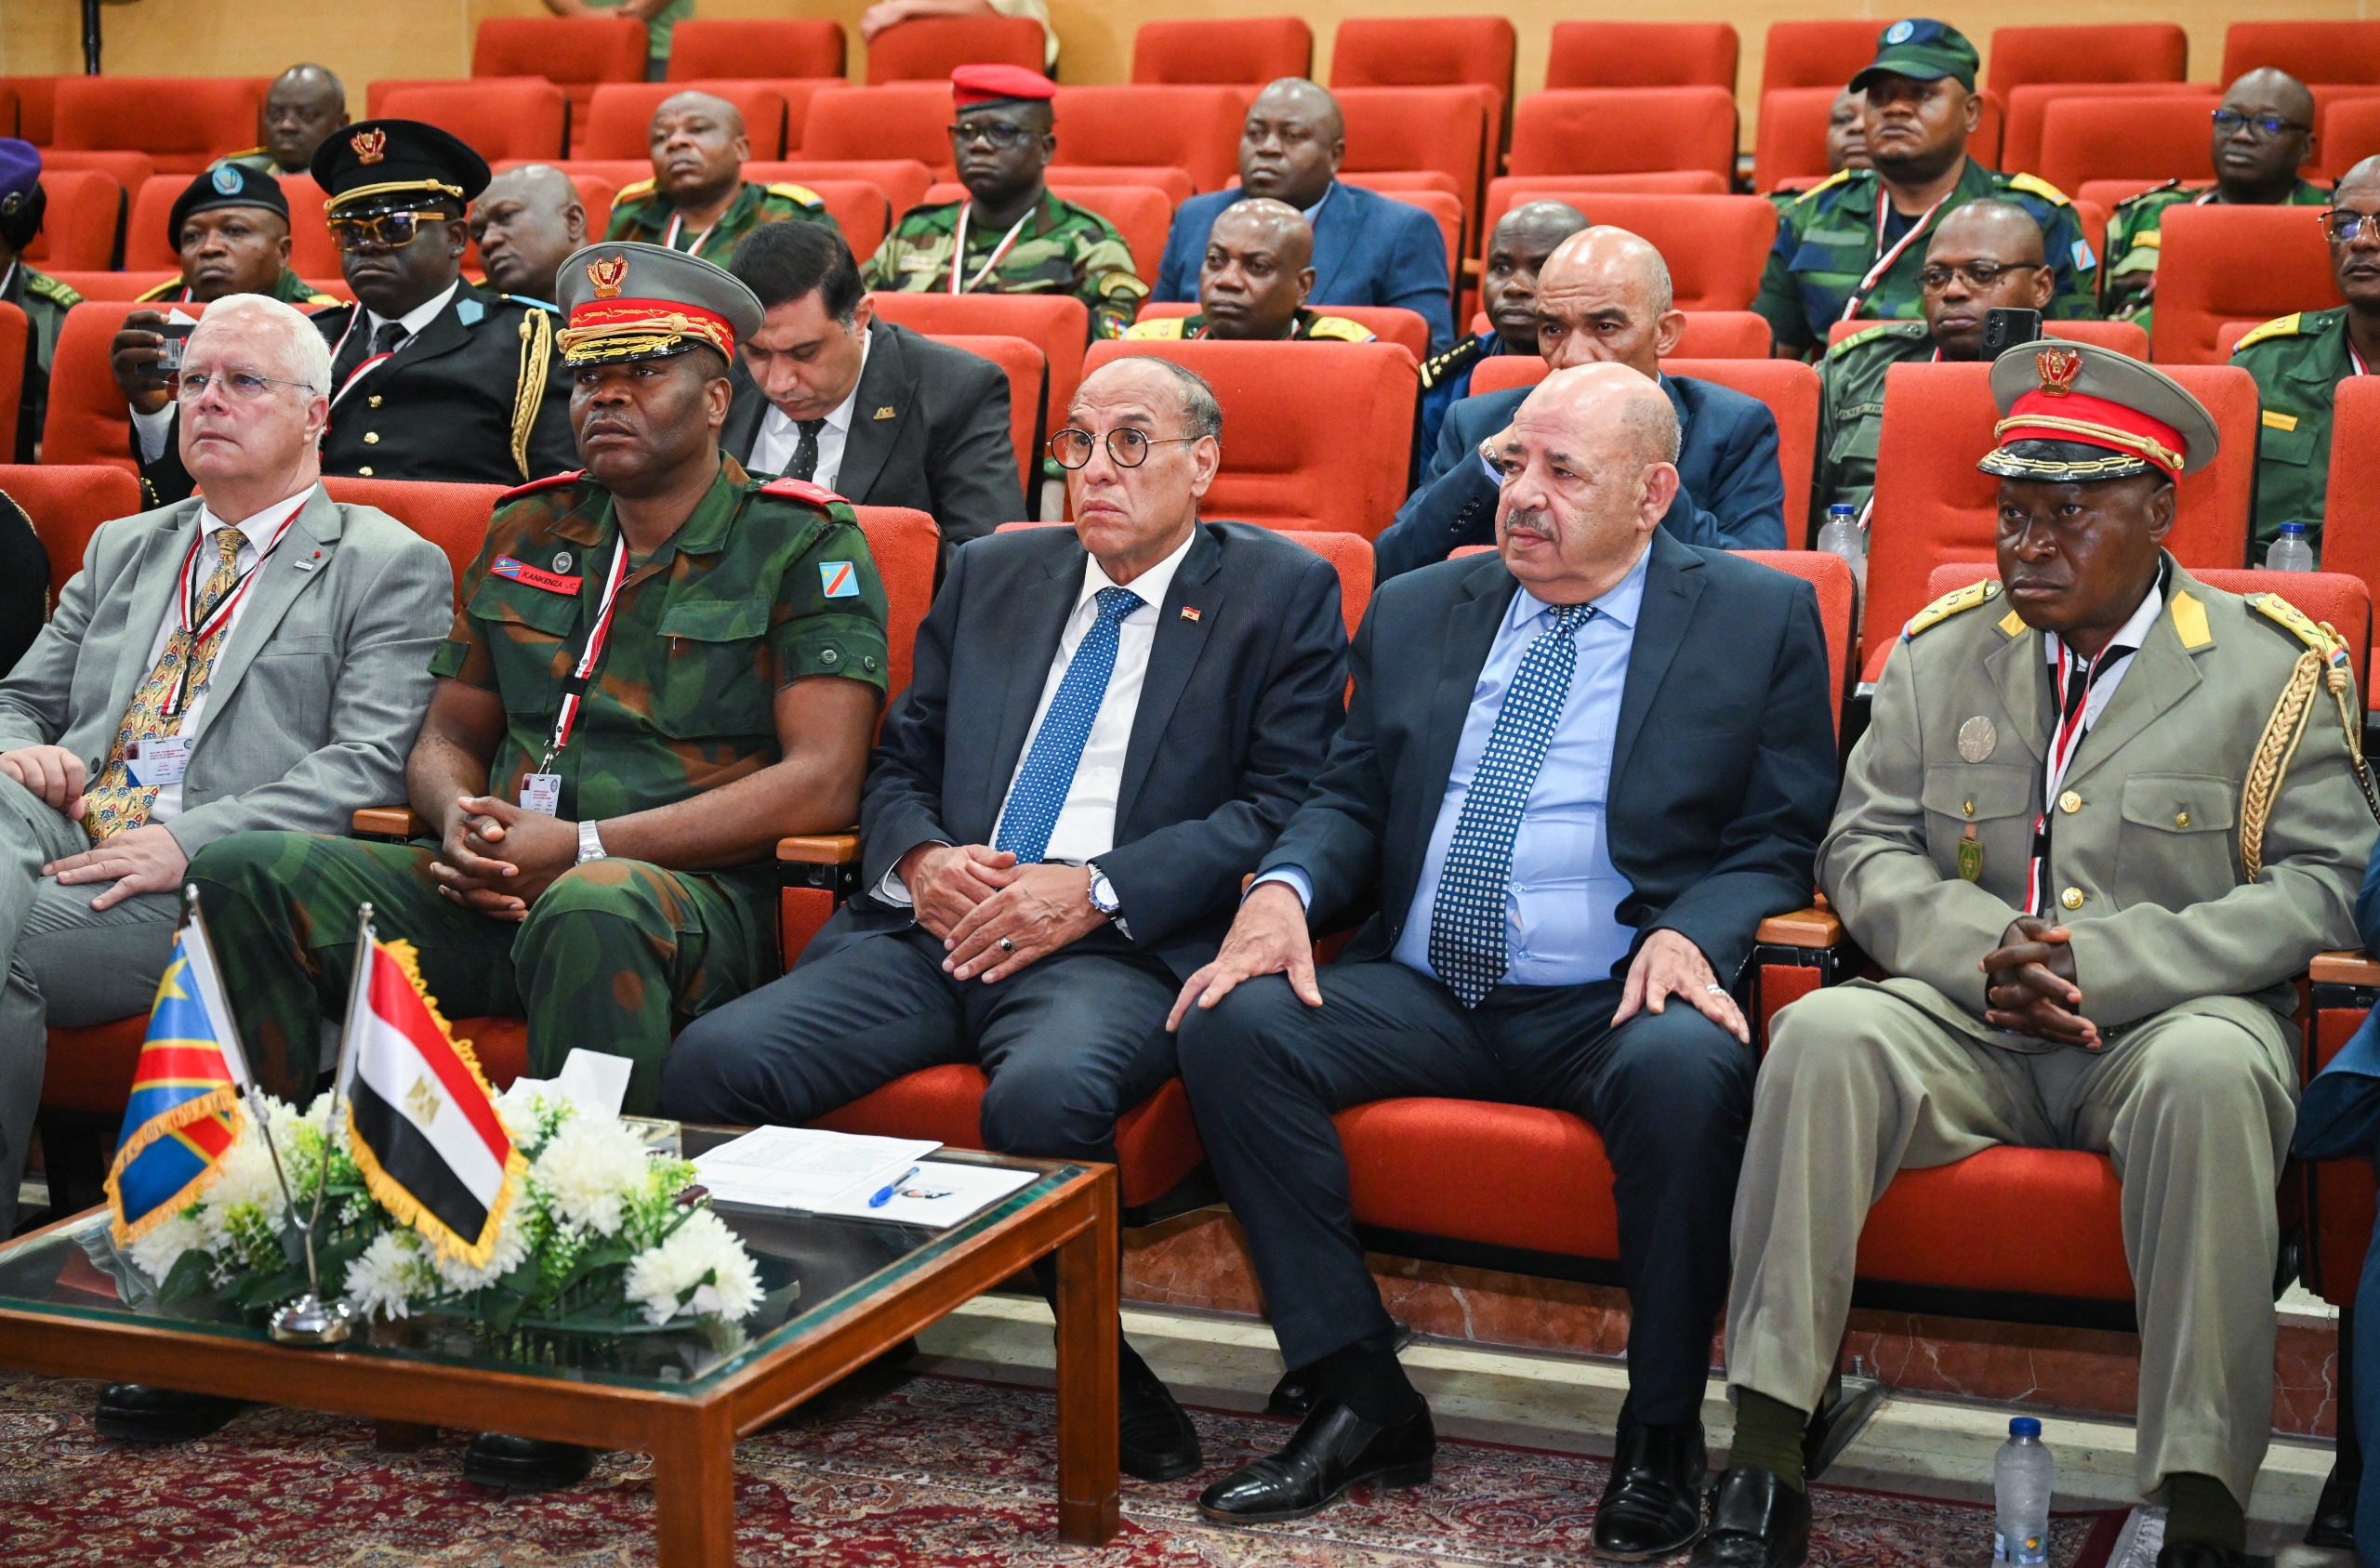 The AOI receives a delegation from the Congolese Higher Military Administration College